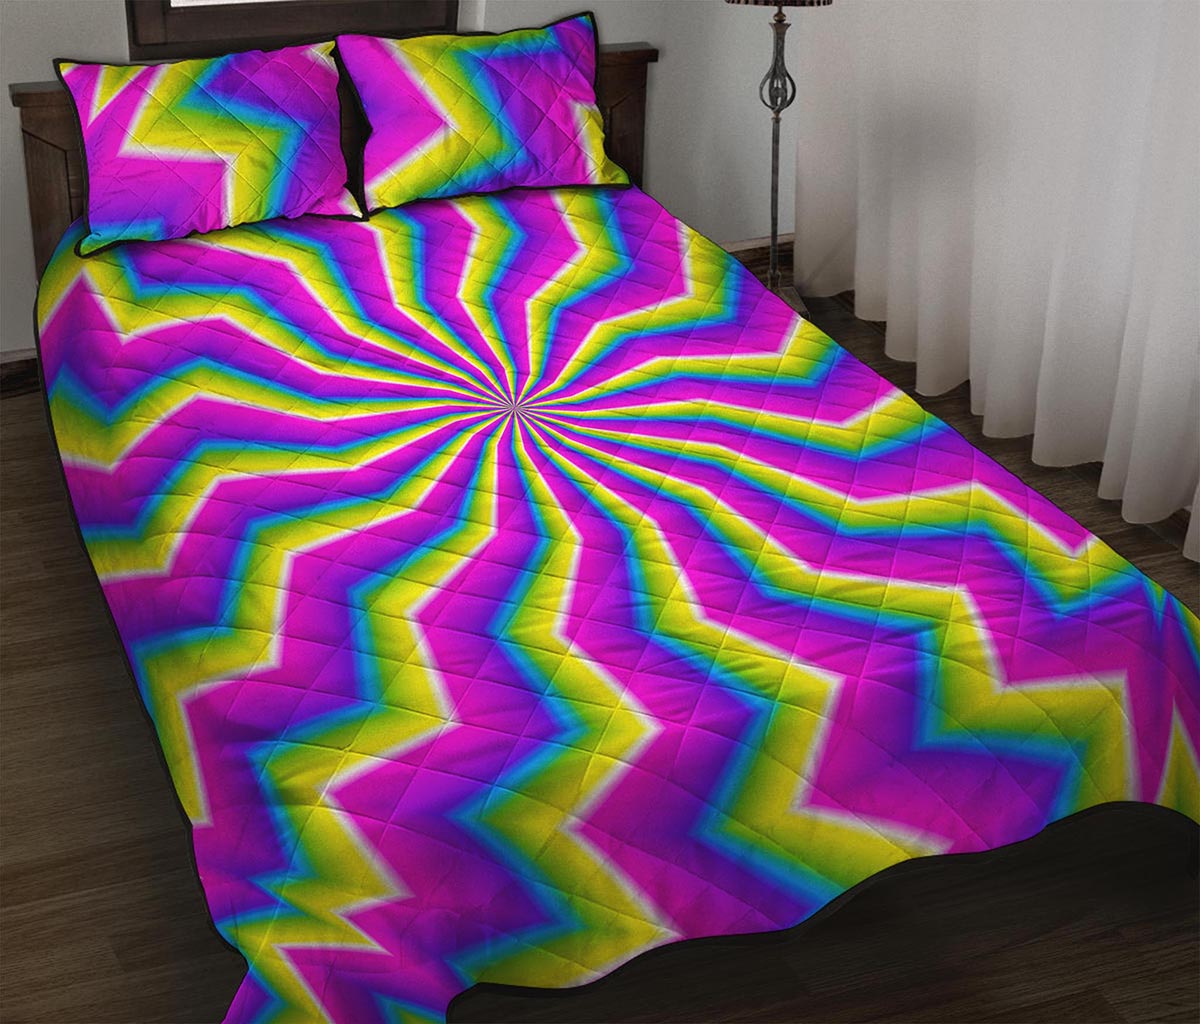 Green Dizzy Moving Optical Illusion Quilt Bed Set